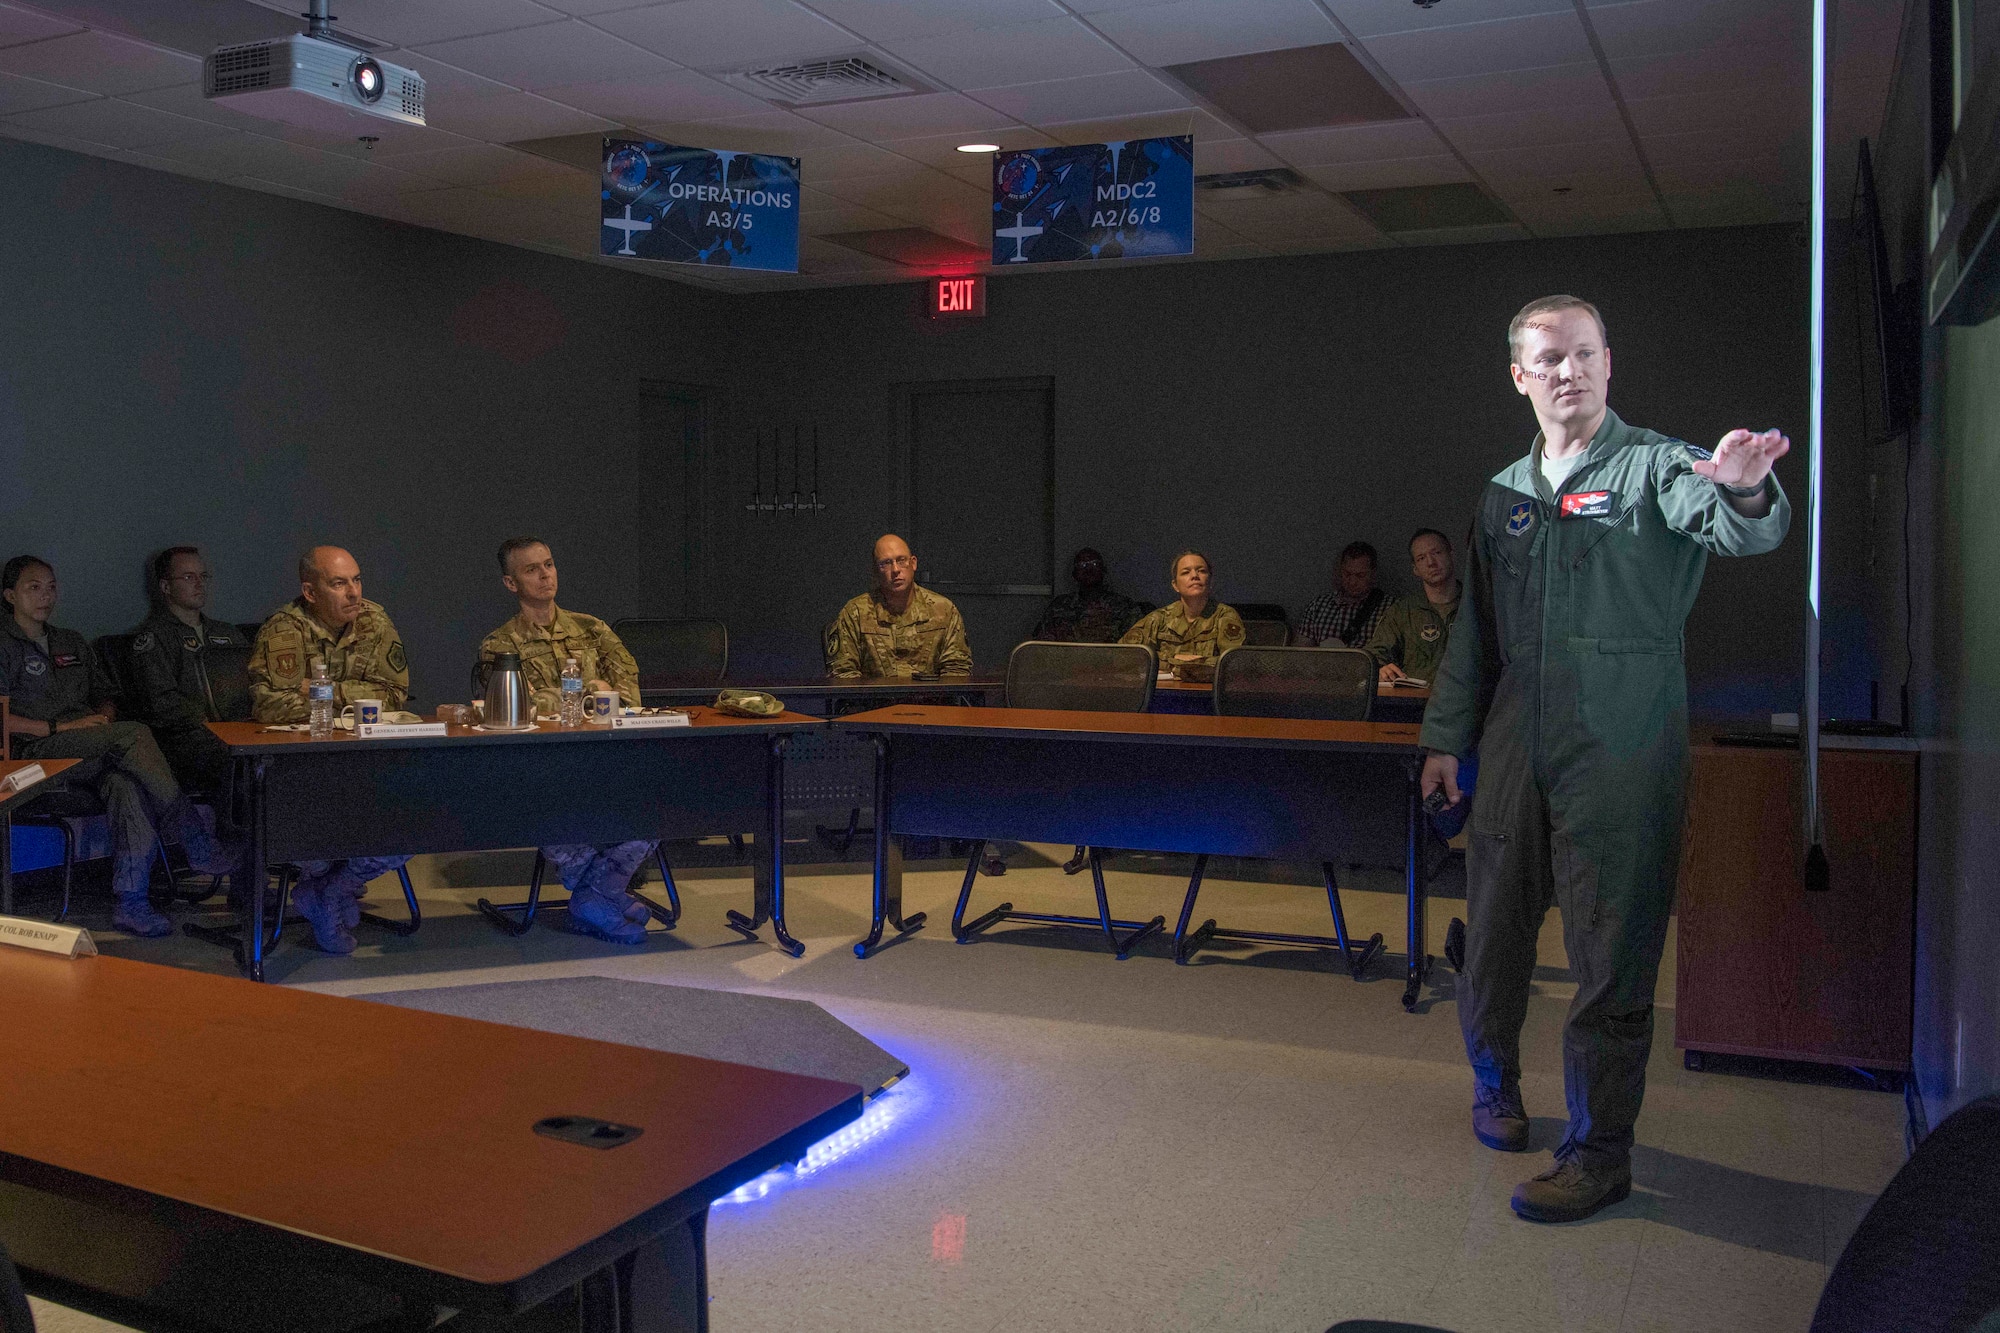 Lt. Col. Matthew Strohmeyer, Detachment 24 commander, briefs Gen. Jeffrey L. Harrigian, United States Air Forces Europe and United States Air Forces Africa commander, on the establishment of a resilient mesh network and its capabilities, during a visit to Detachment 24 at Joint Base San Antonio-Randolph, Texas, June 24, 2019.  Det. 24 will utilize Learning Next initiatives to examine how Air Education and Training Command members have historically trained Airmen and then will identify potential solutions to modernize flying and technical training pipelines, and training practices across various communities to produce qualified Airmen in a learning-focused manner. (U.S. Air Force photo by Sabrina Fine)